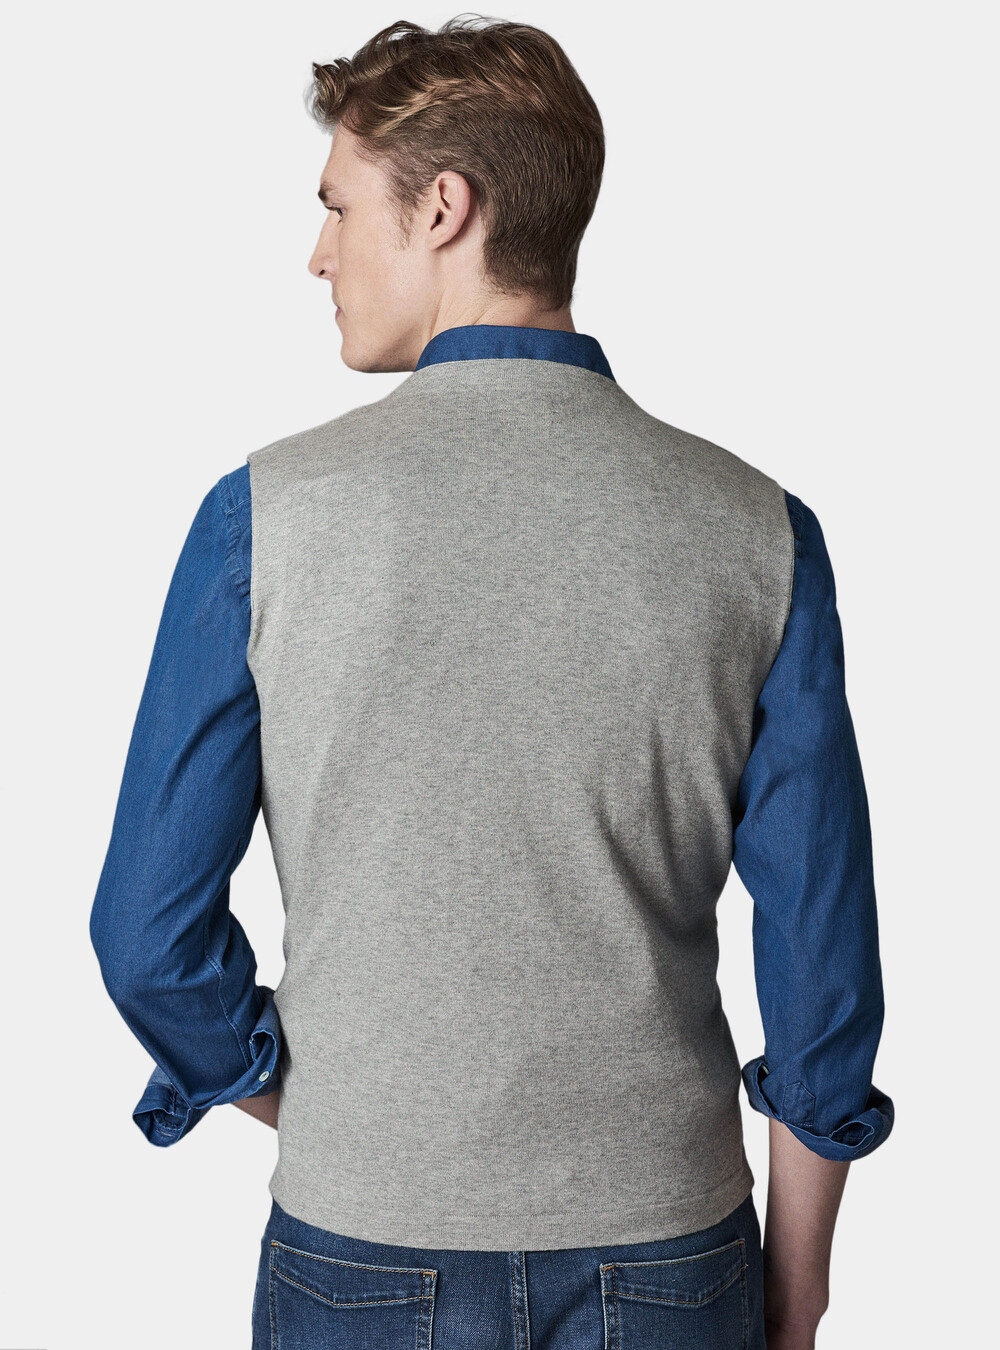 Cotton silk and cashmere double - breasted vest